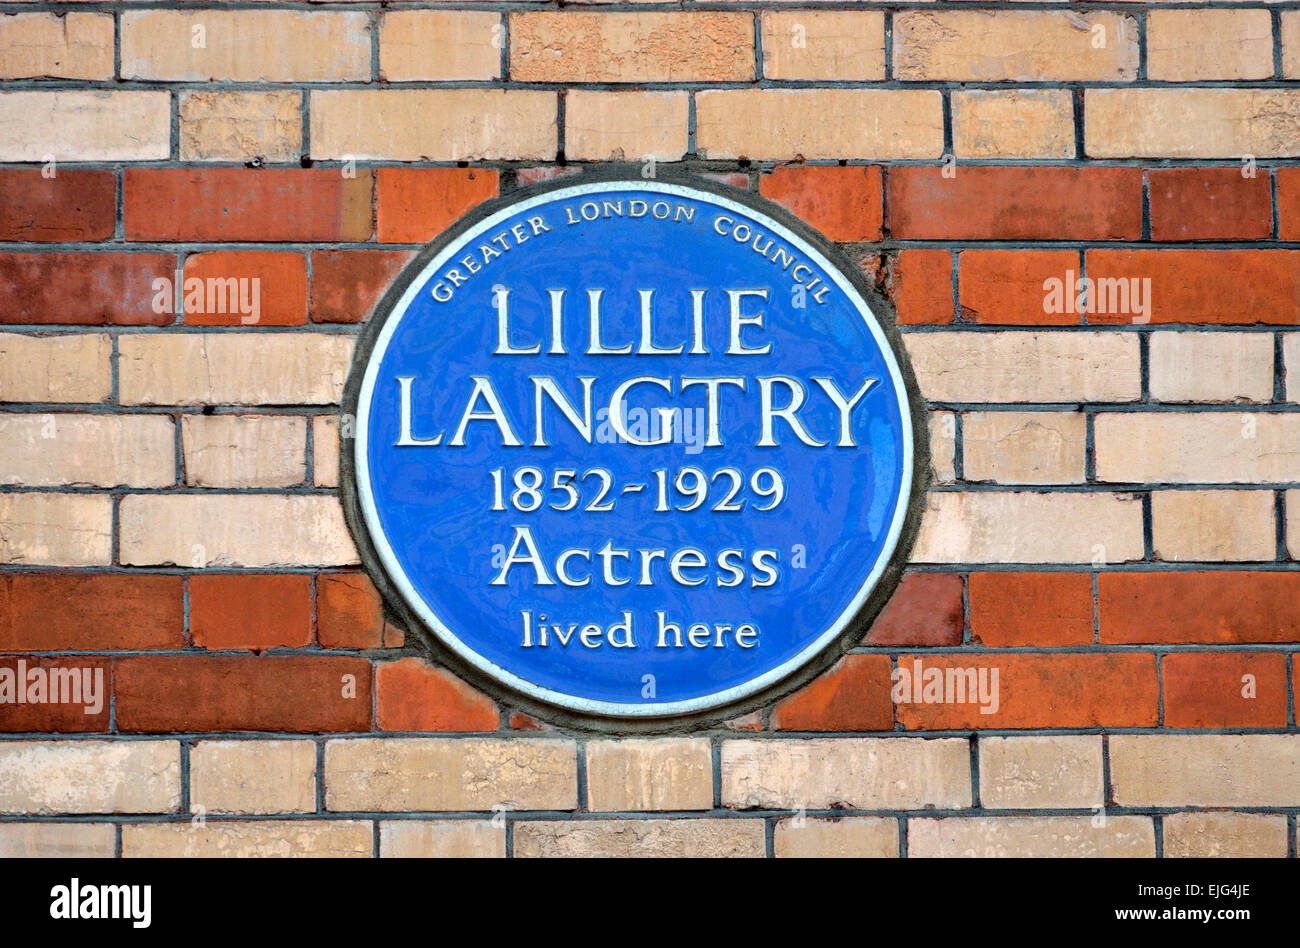 London, England, UK. Commemorative Blue Plaque at 21 Pont Street, Chelsea. LILLIE LANGTRY 1852-1929 Actress lived here. Stock Photo